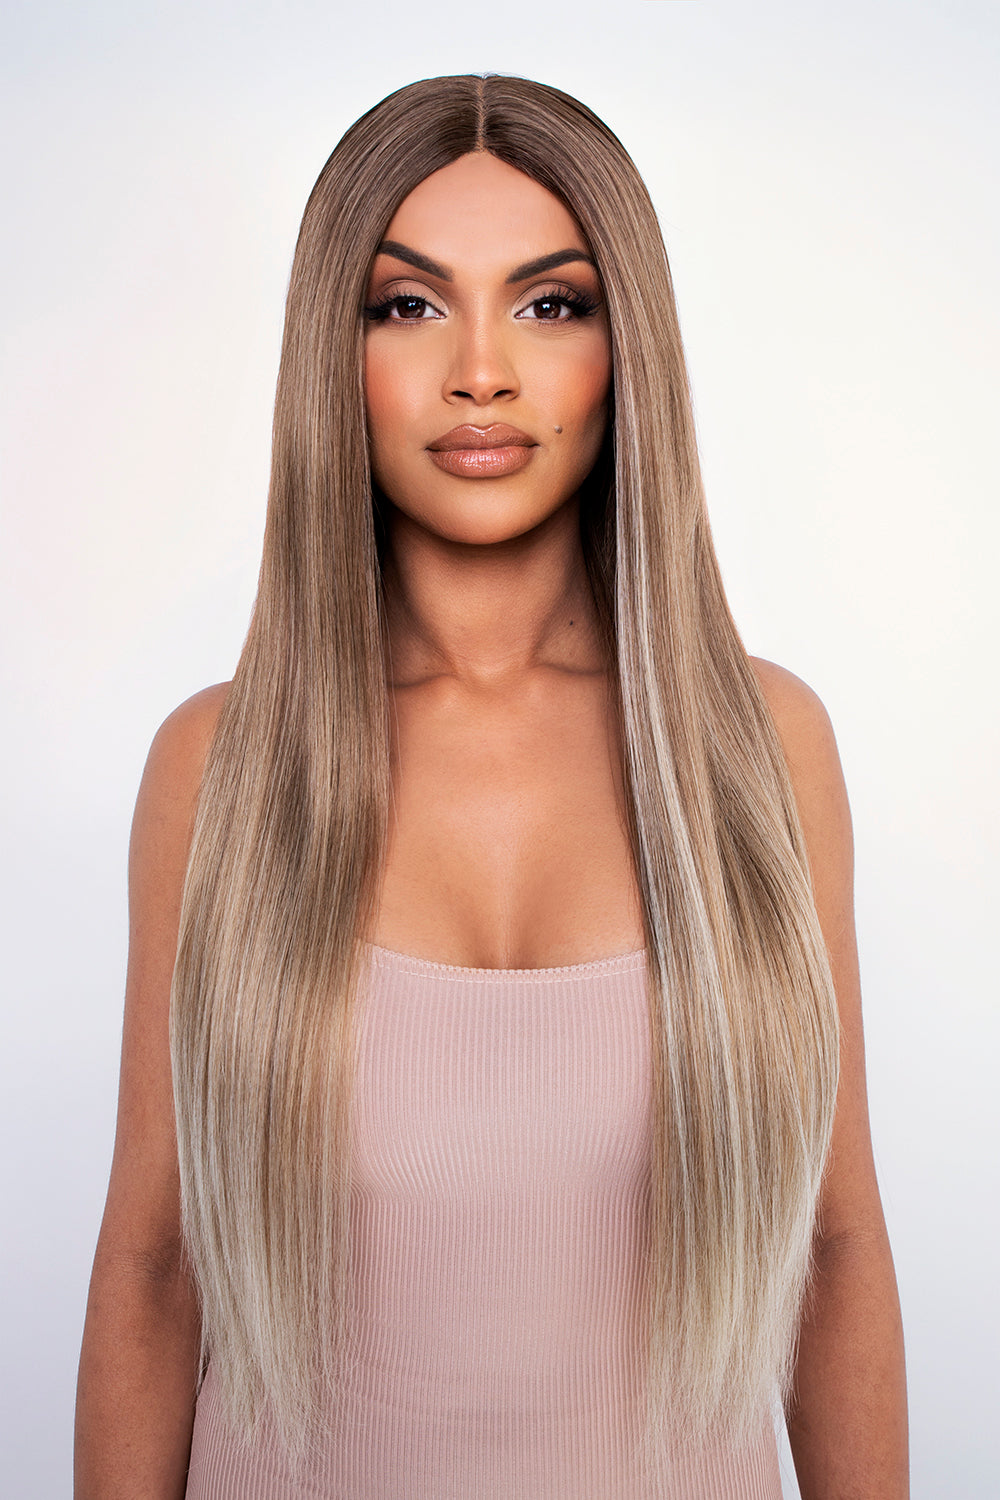 The Pia - Perruque Lace Front Blonde Balayage Face Droite au Poker